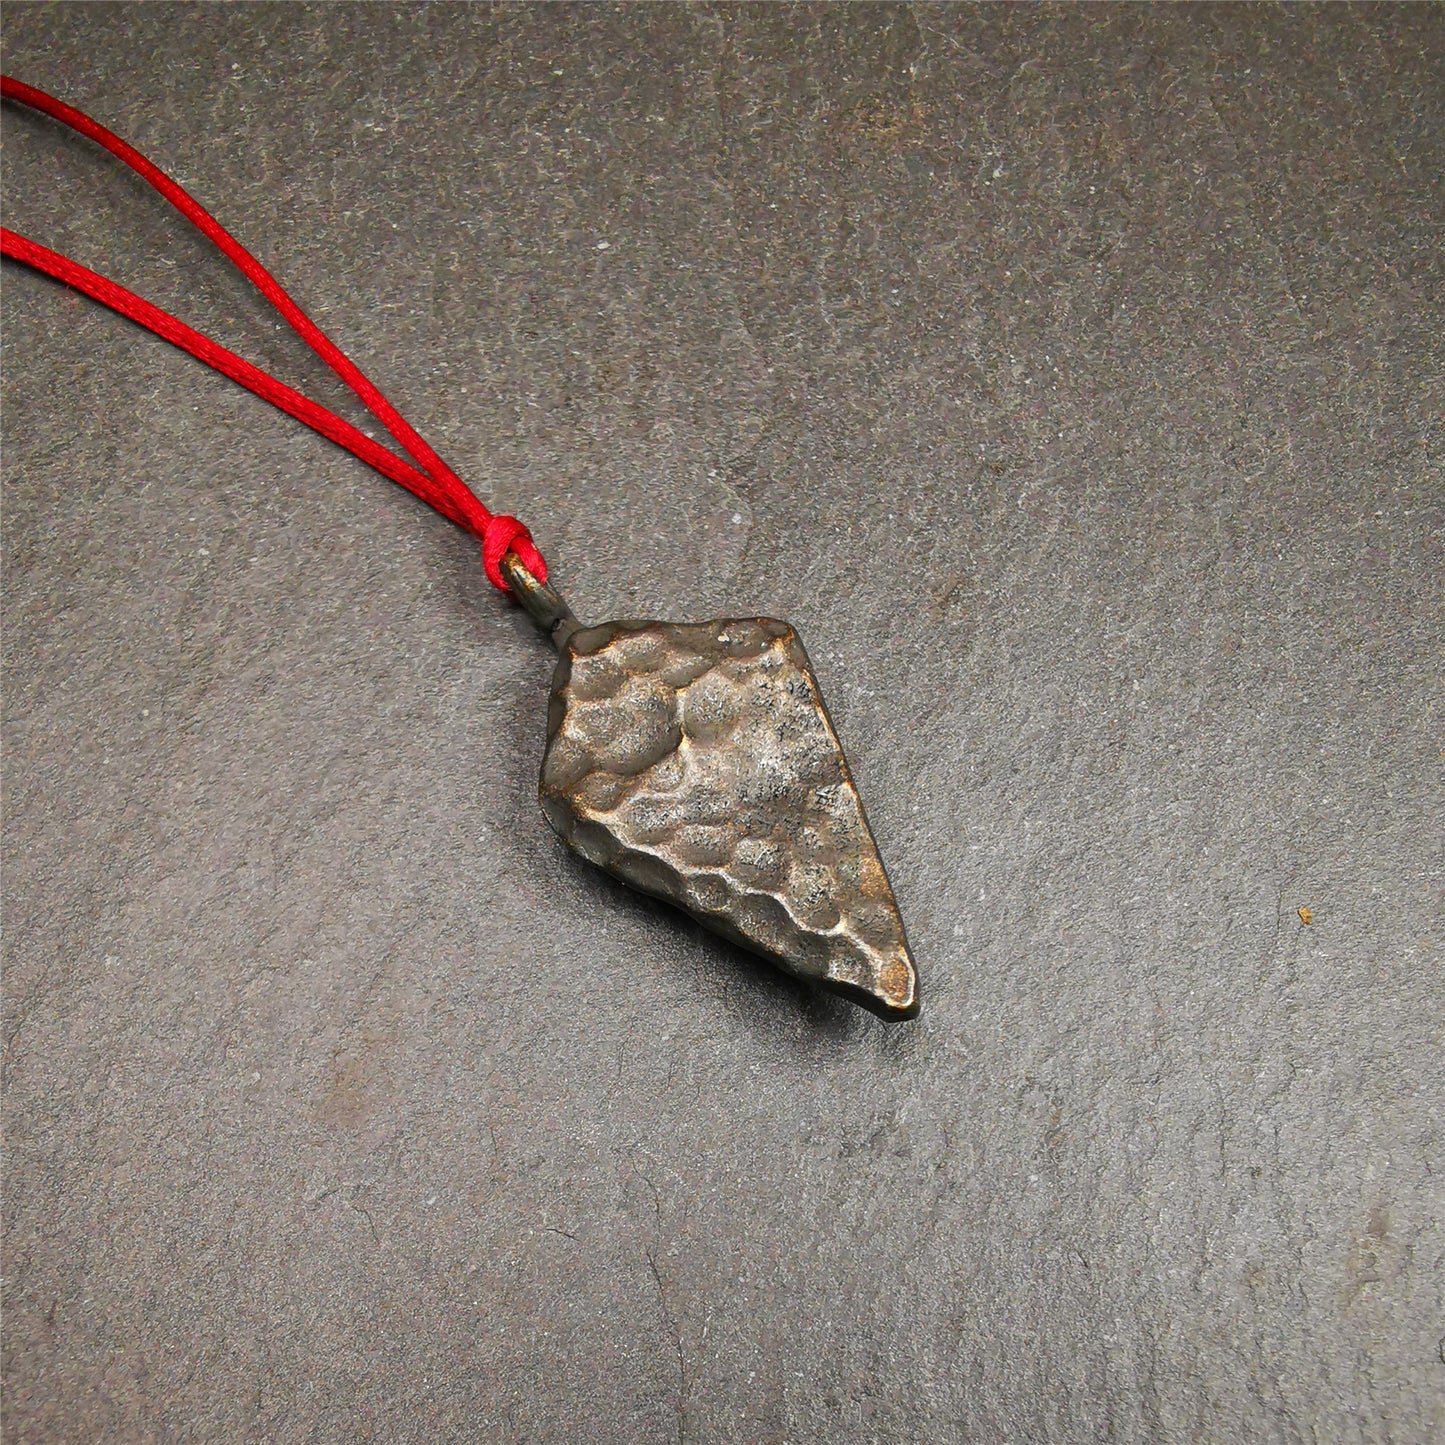 This demon pendant is made of copper, spearhead or leaf shape,dark color,size is 45mm × 20mm,You can make it a necklace, pendant, keychain,or just as an ornament.